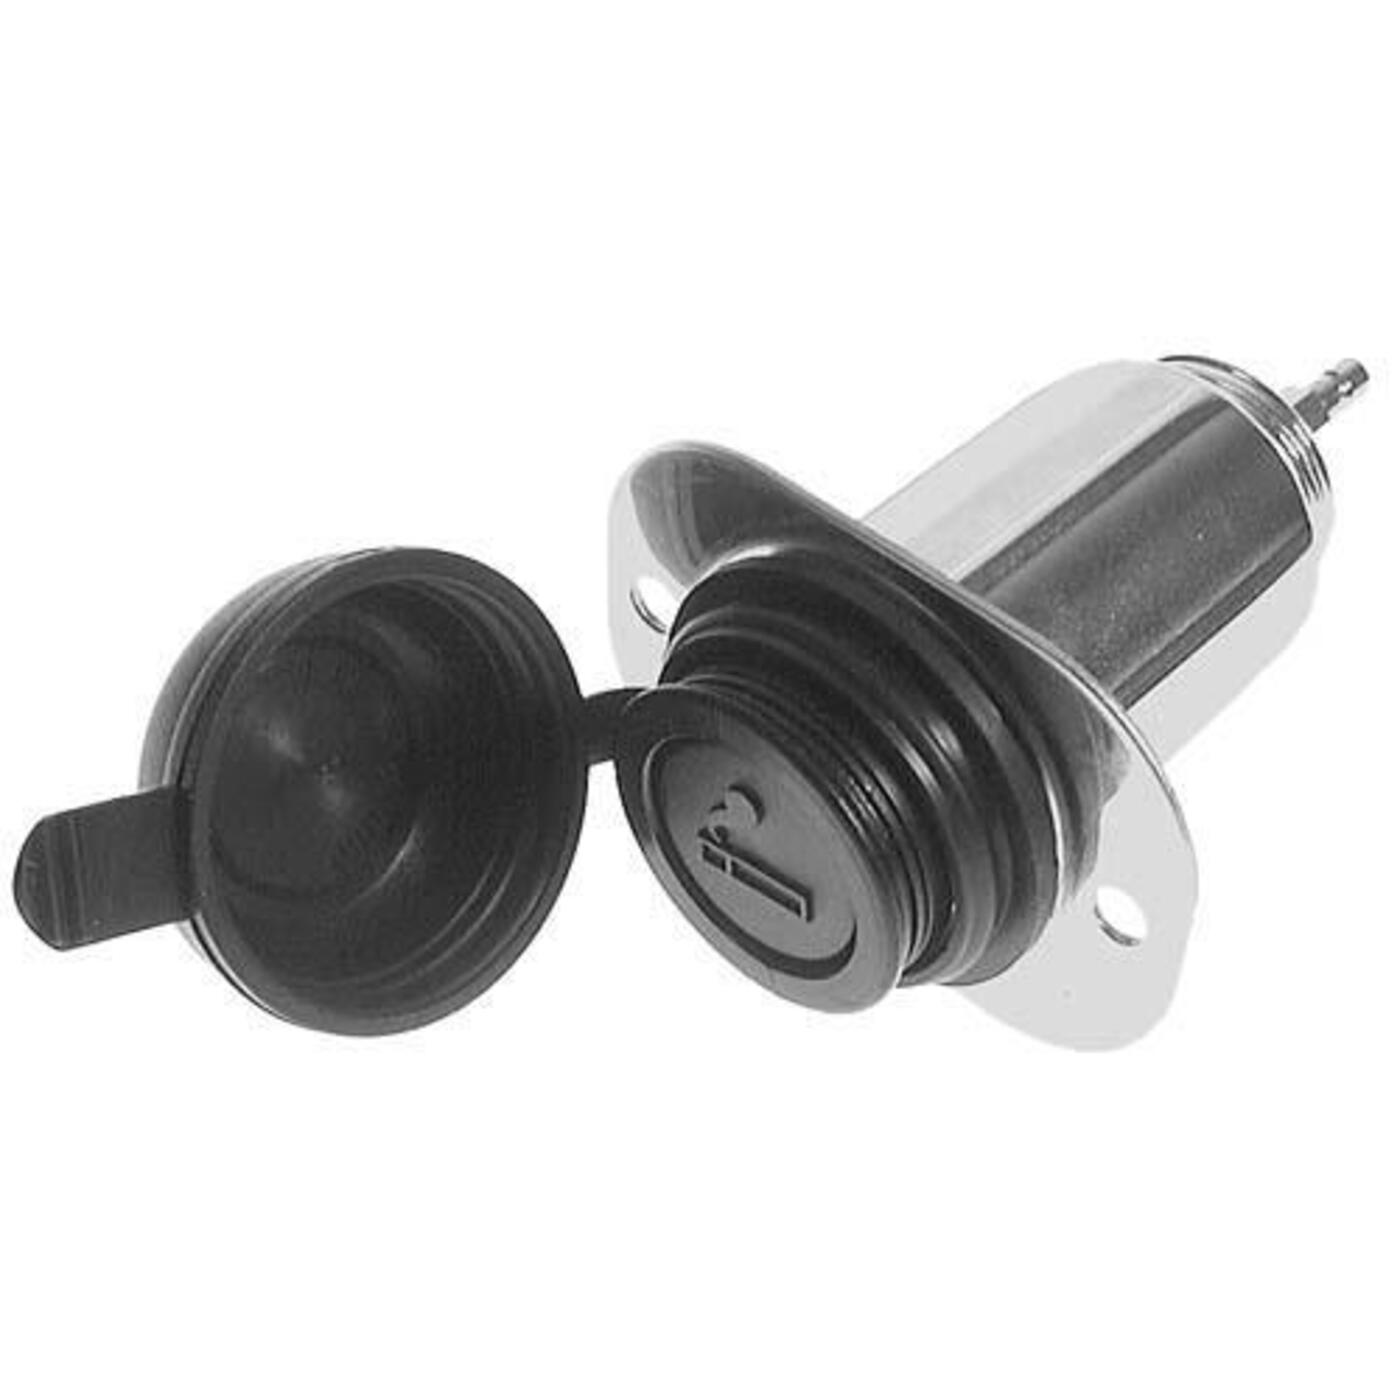 All-weather Cigarette Lighter (Universal Fit)